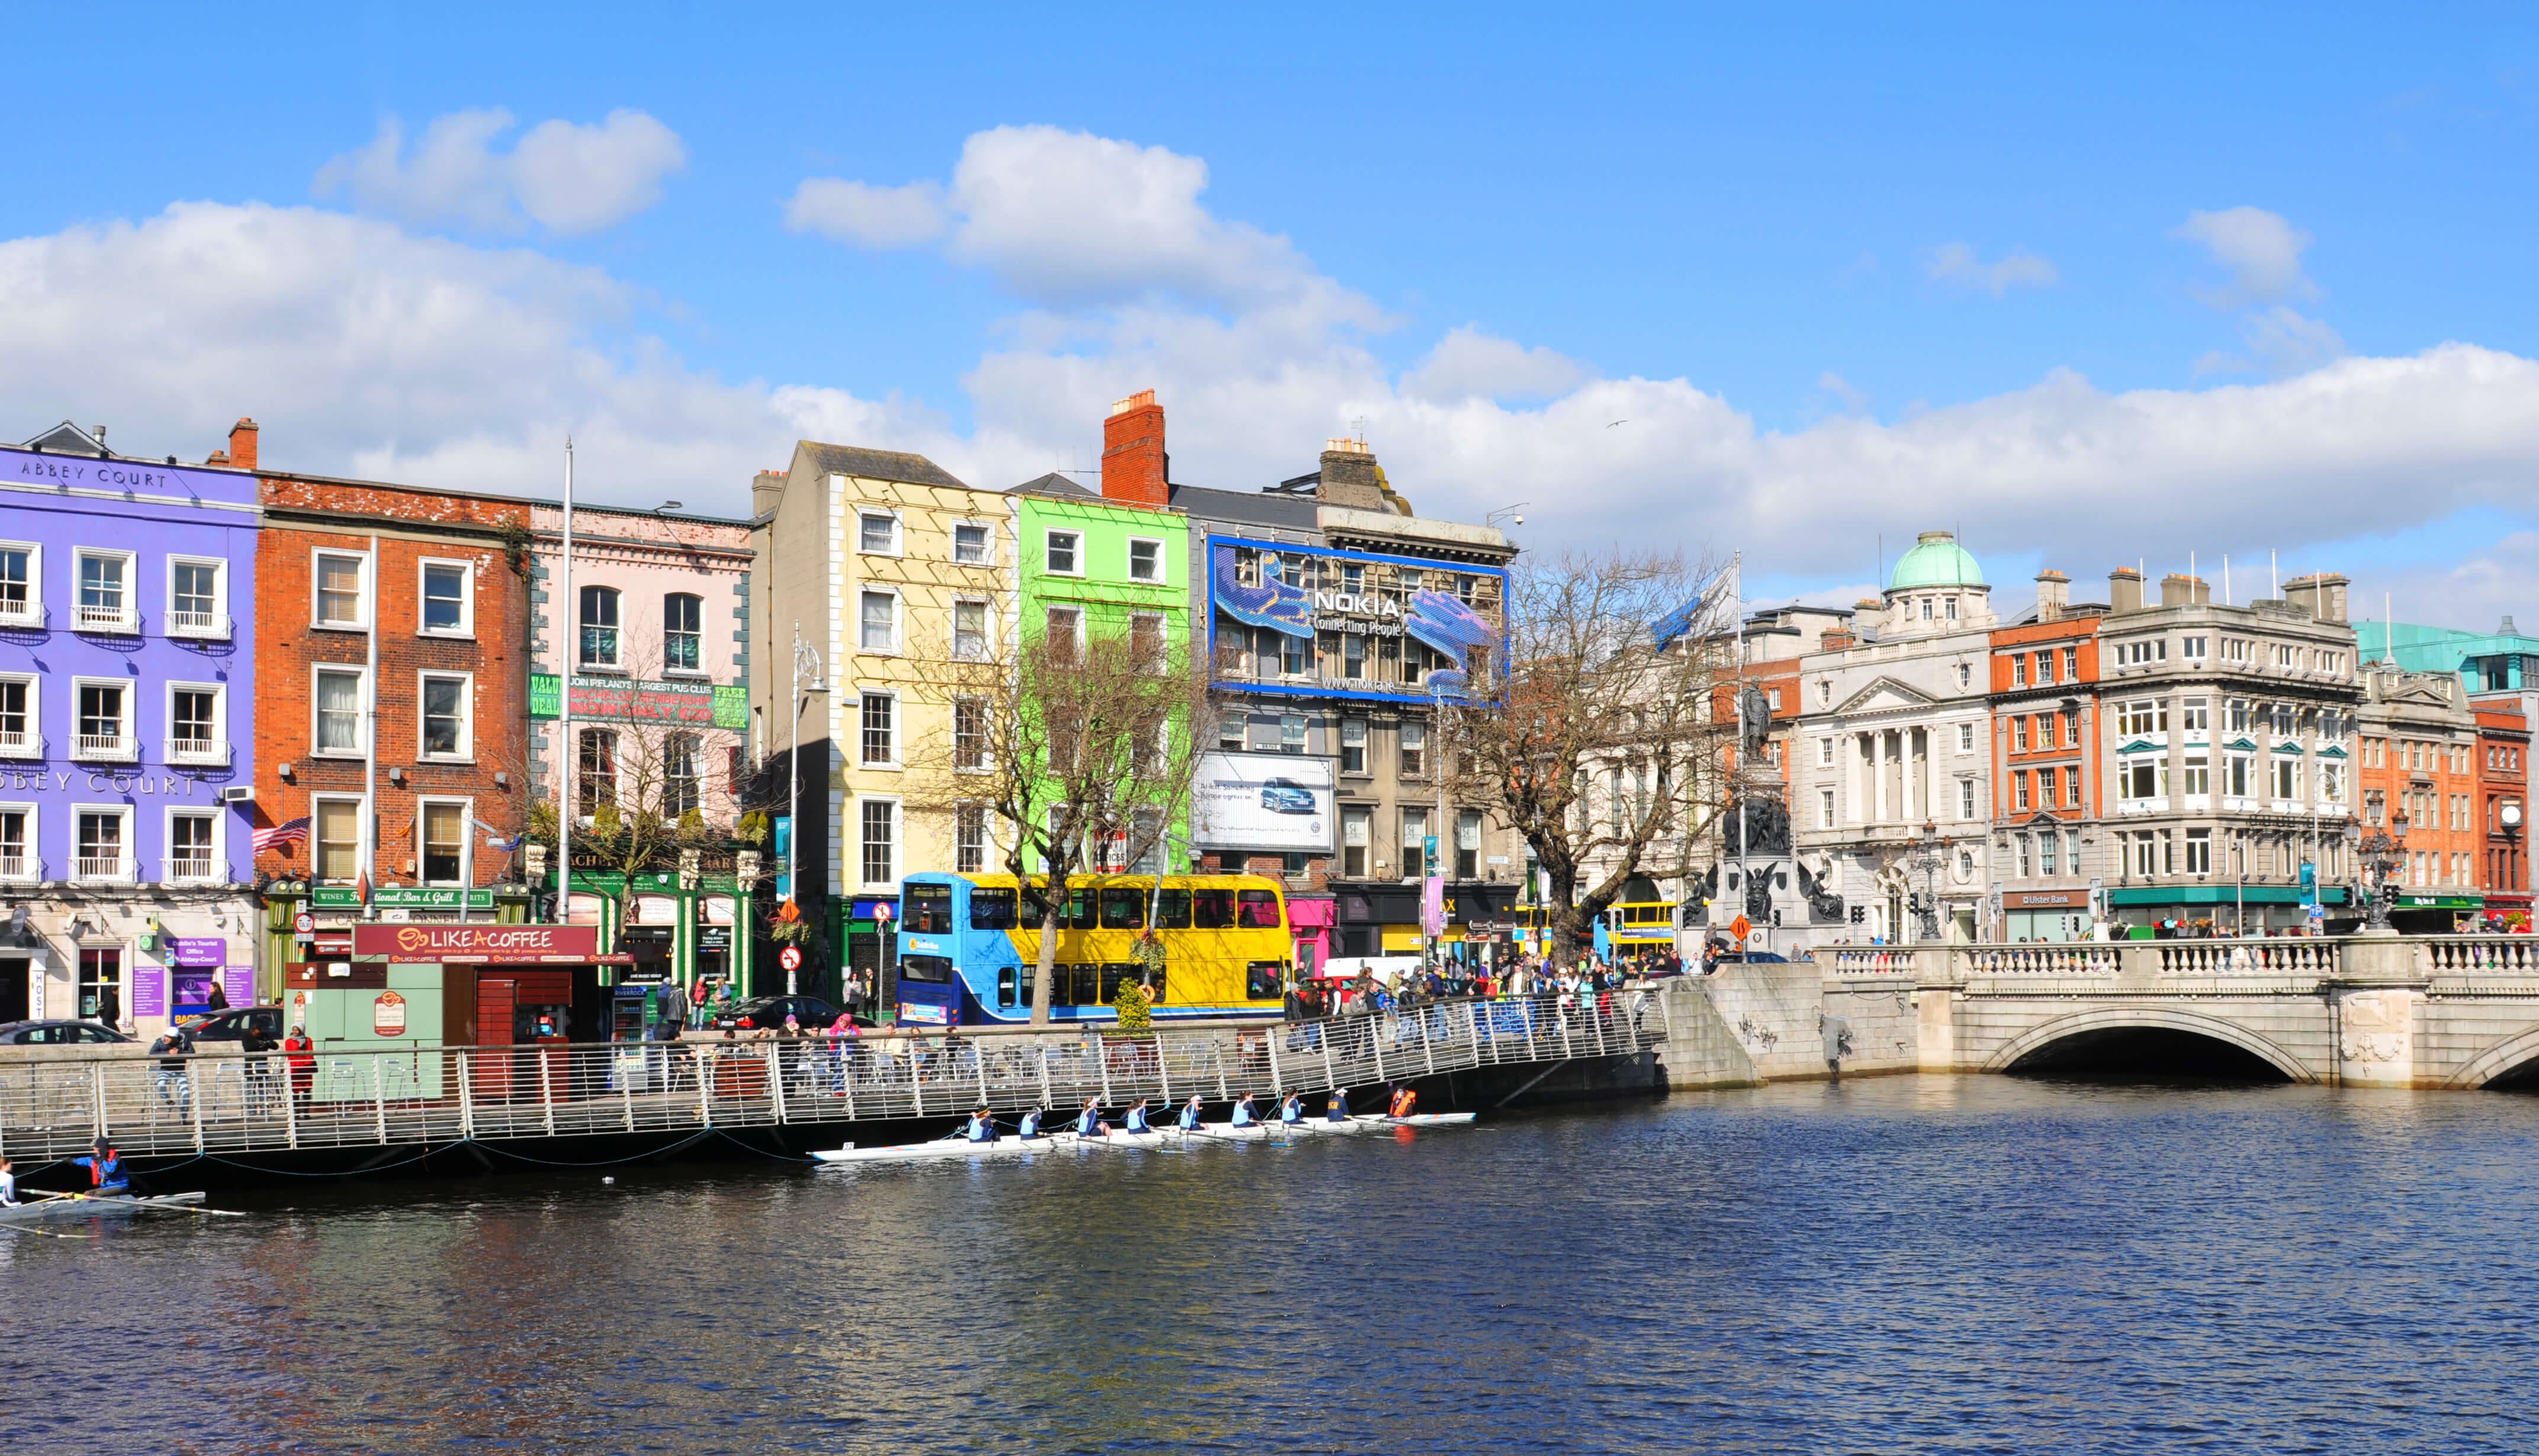 5 Must-See Sights of Dublin